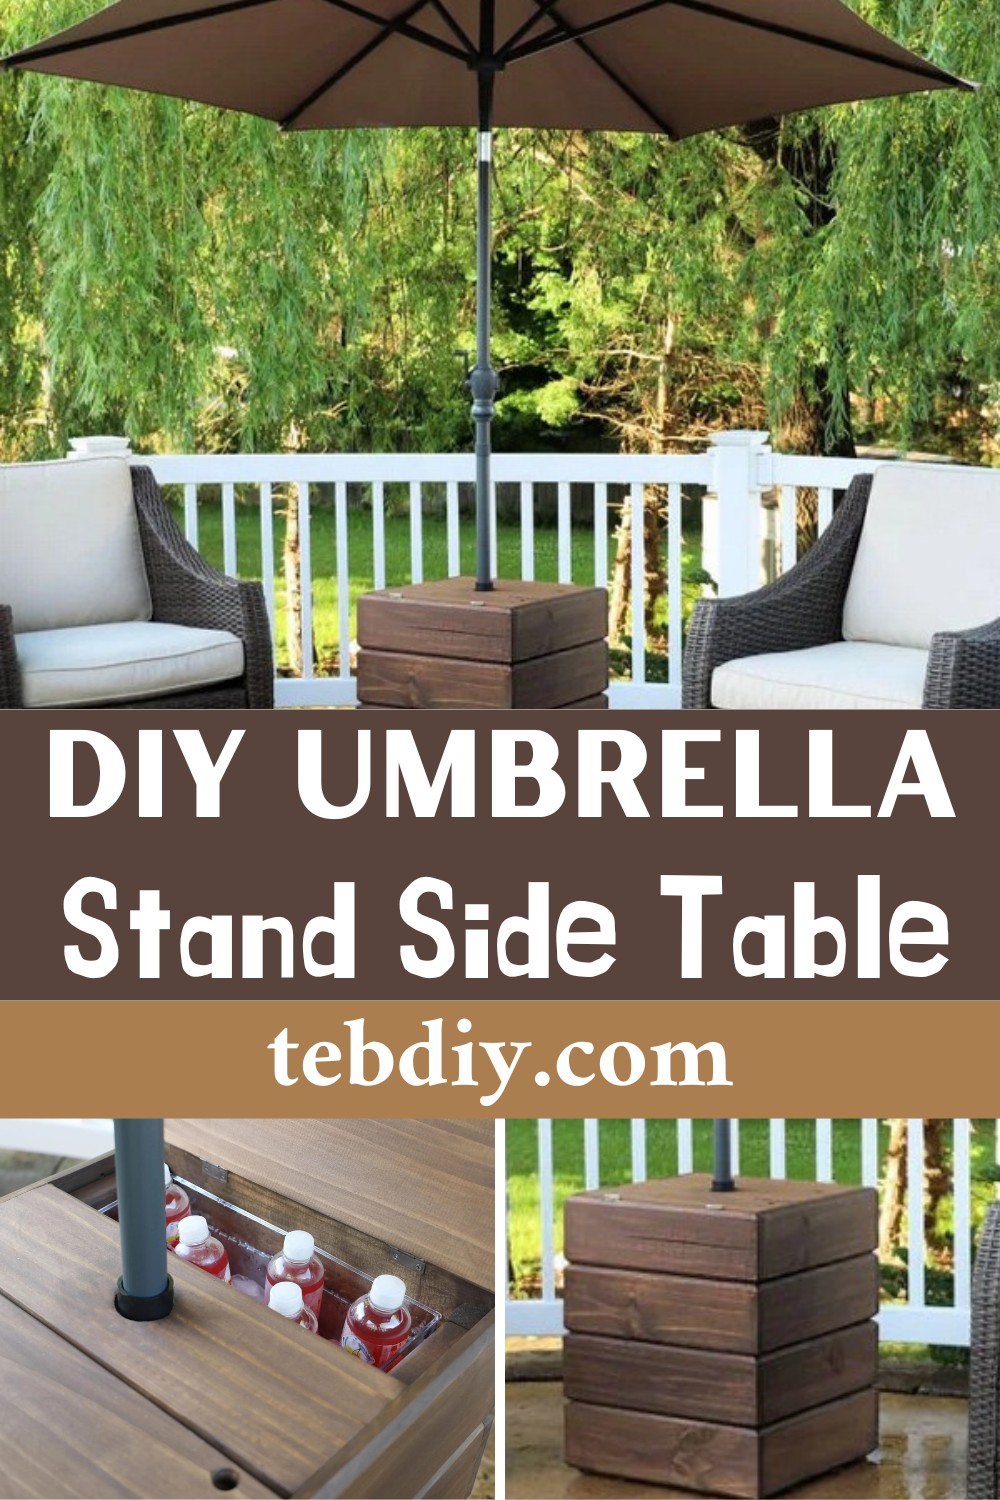 How To DIY Umbrella Stand Side Table